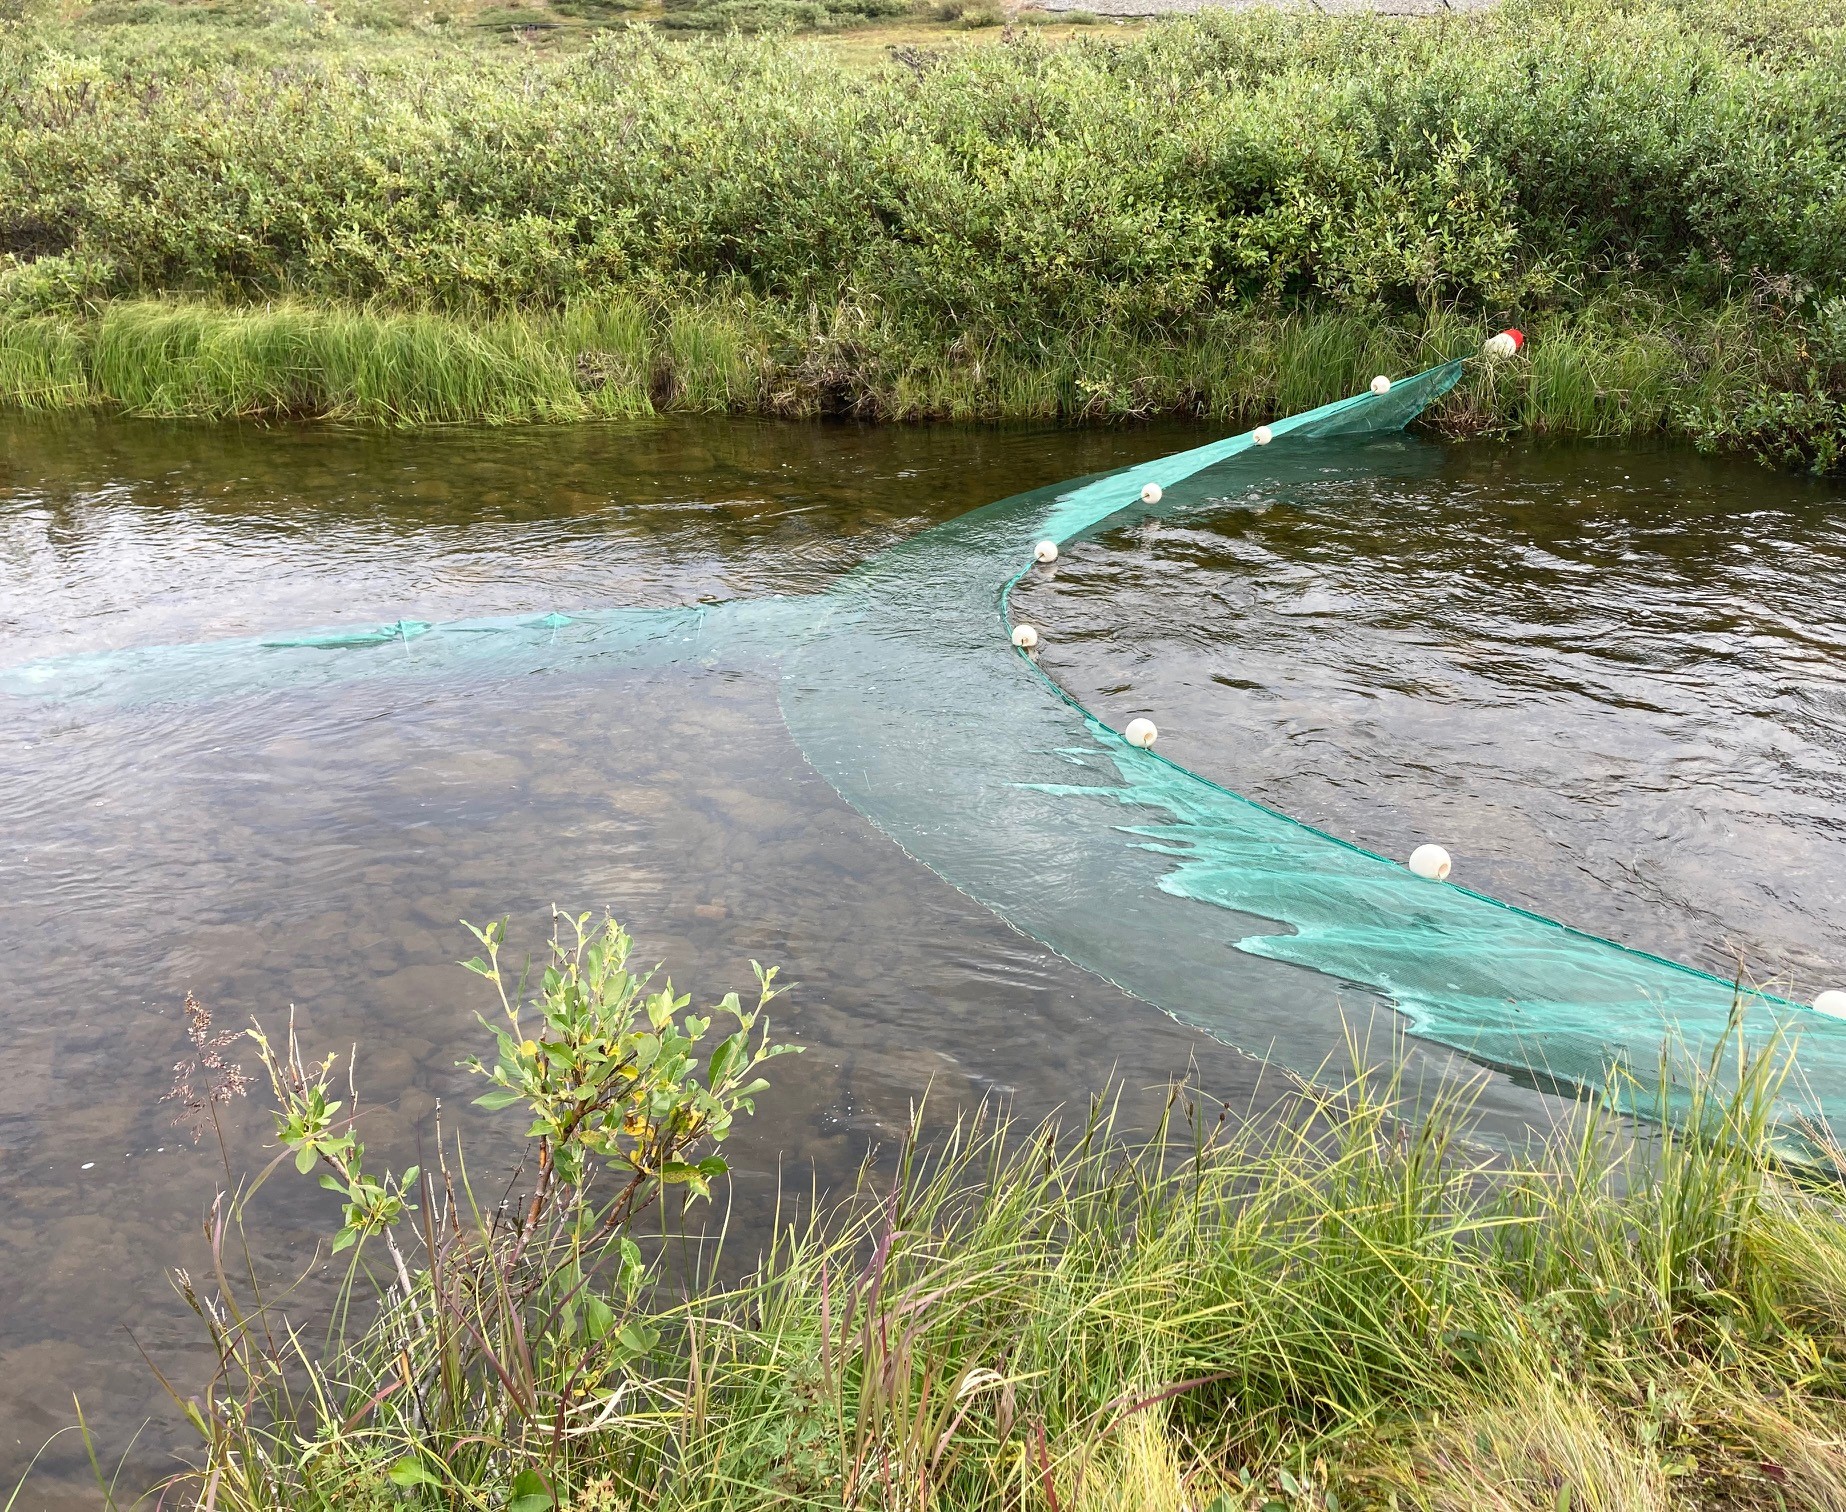 Morag Clinton
In August 2022, professor Morag Clinton sampled Arctic grayling from Toolik Lake using nets like the one pictured above.